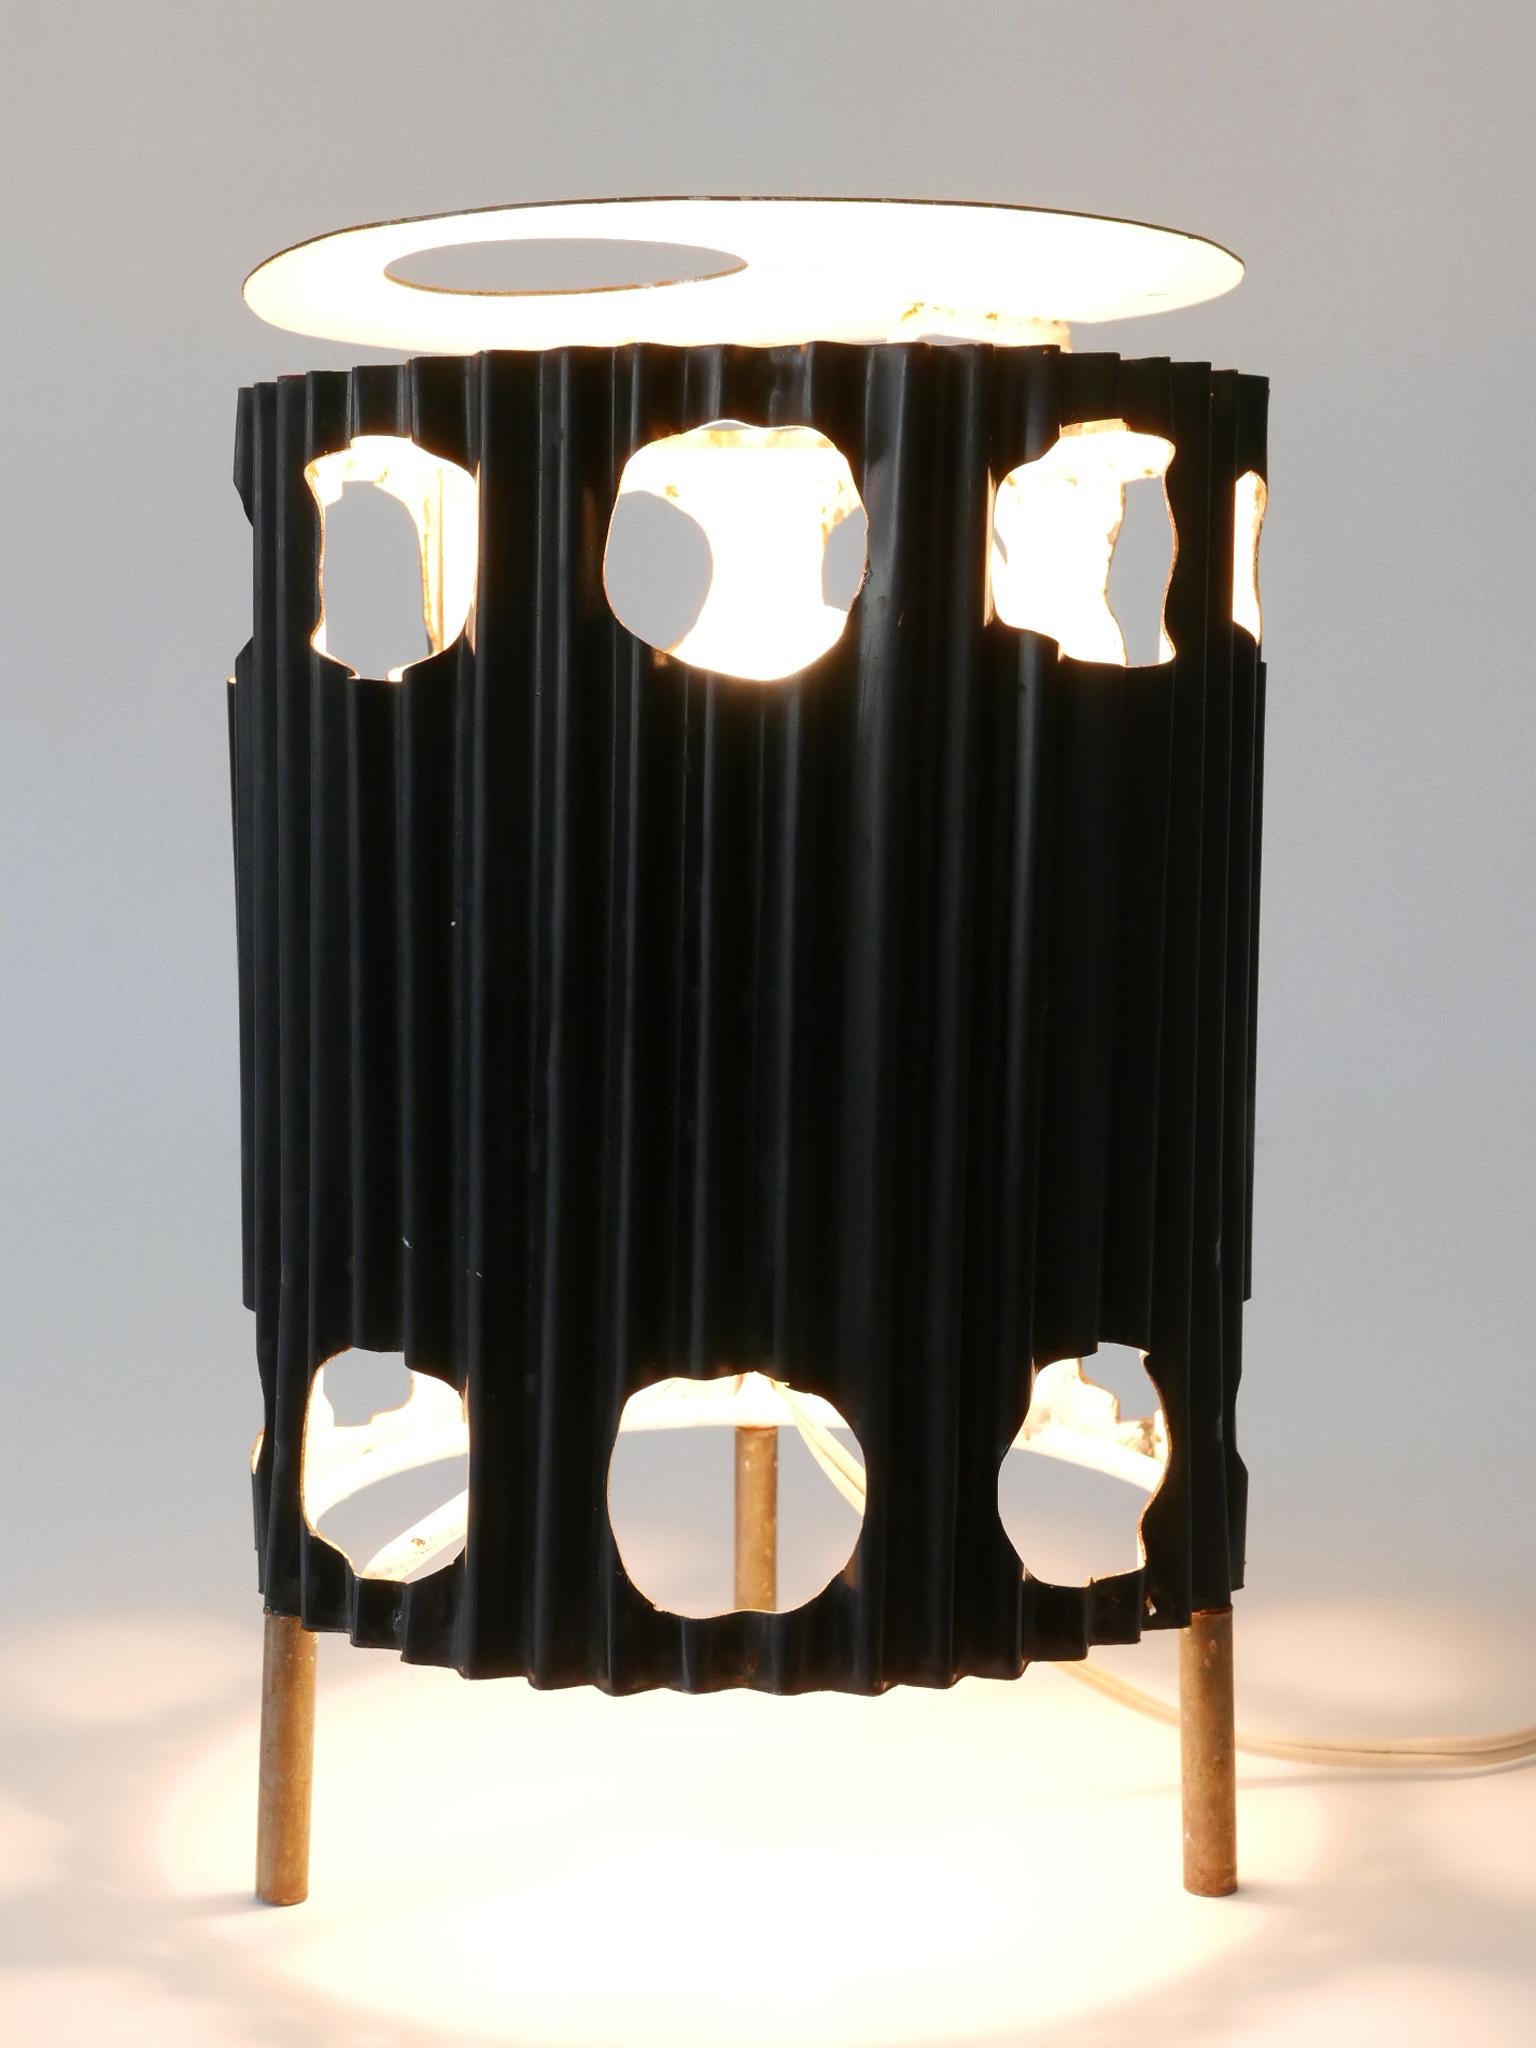 Extremely Rare Mid-Century Modern Table Lamp 'Java' by Mathieu Matégot 1950s For Sale 5